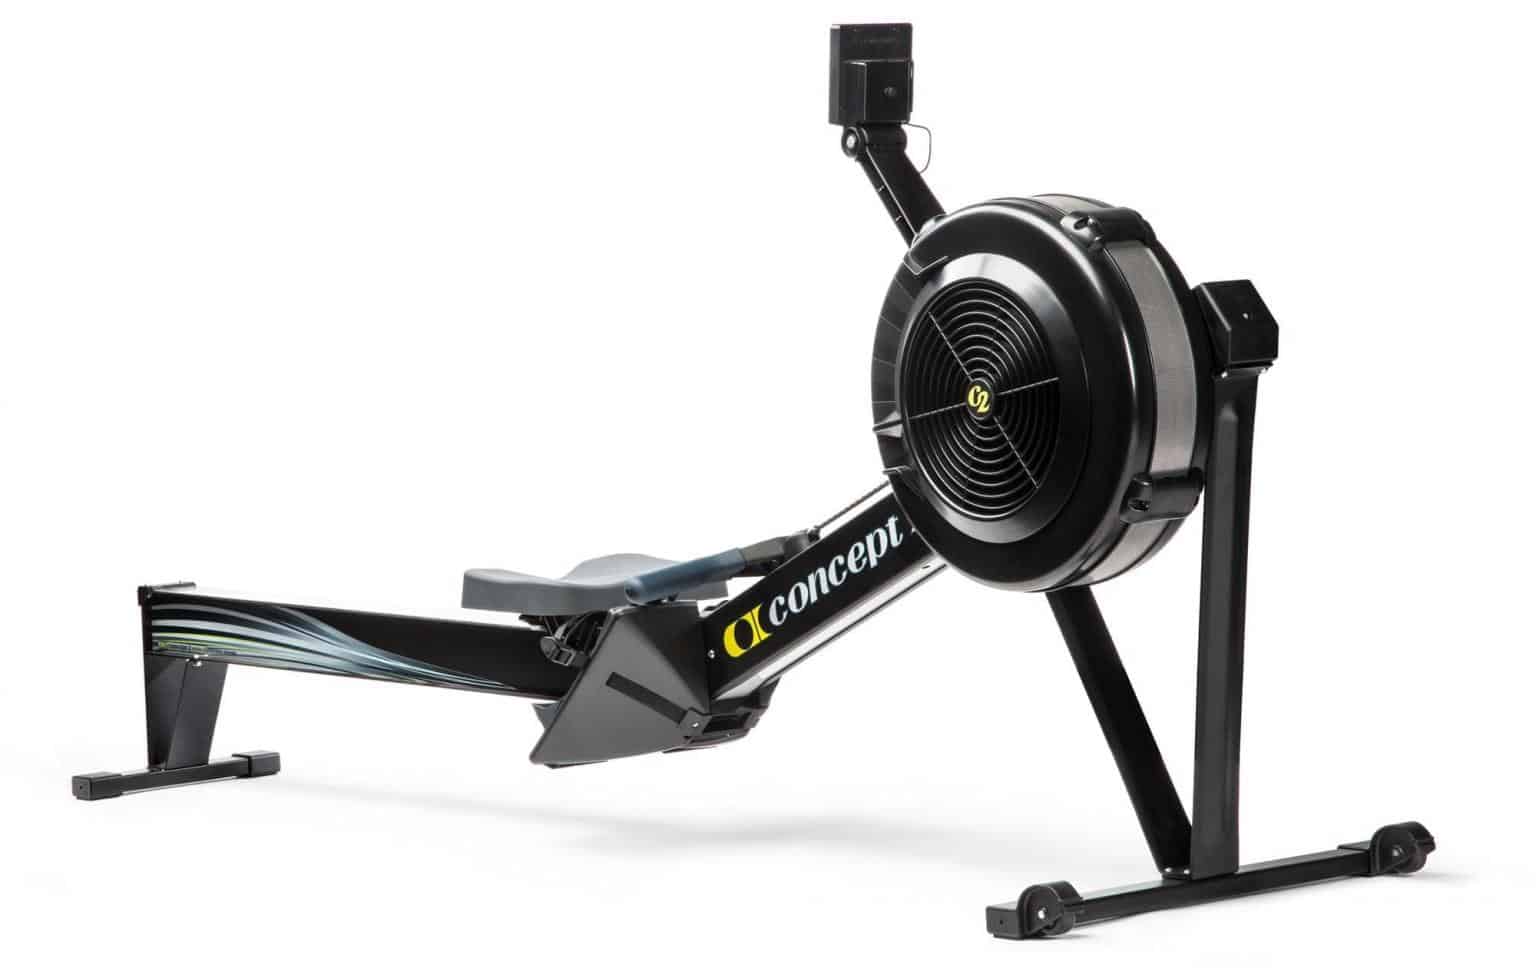 Concept 2 Model D Indoor Rower - Excellent cardio and endurance training with this compact and efficient exercise machine